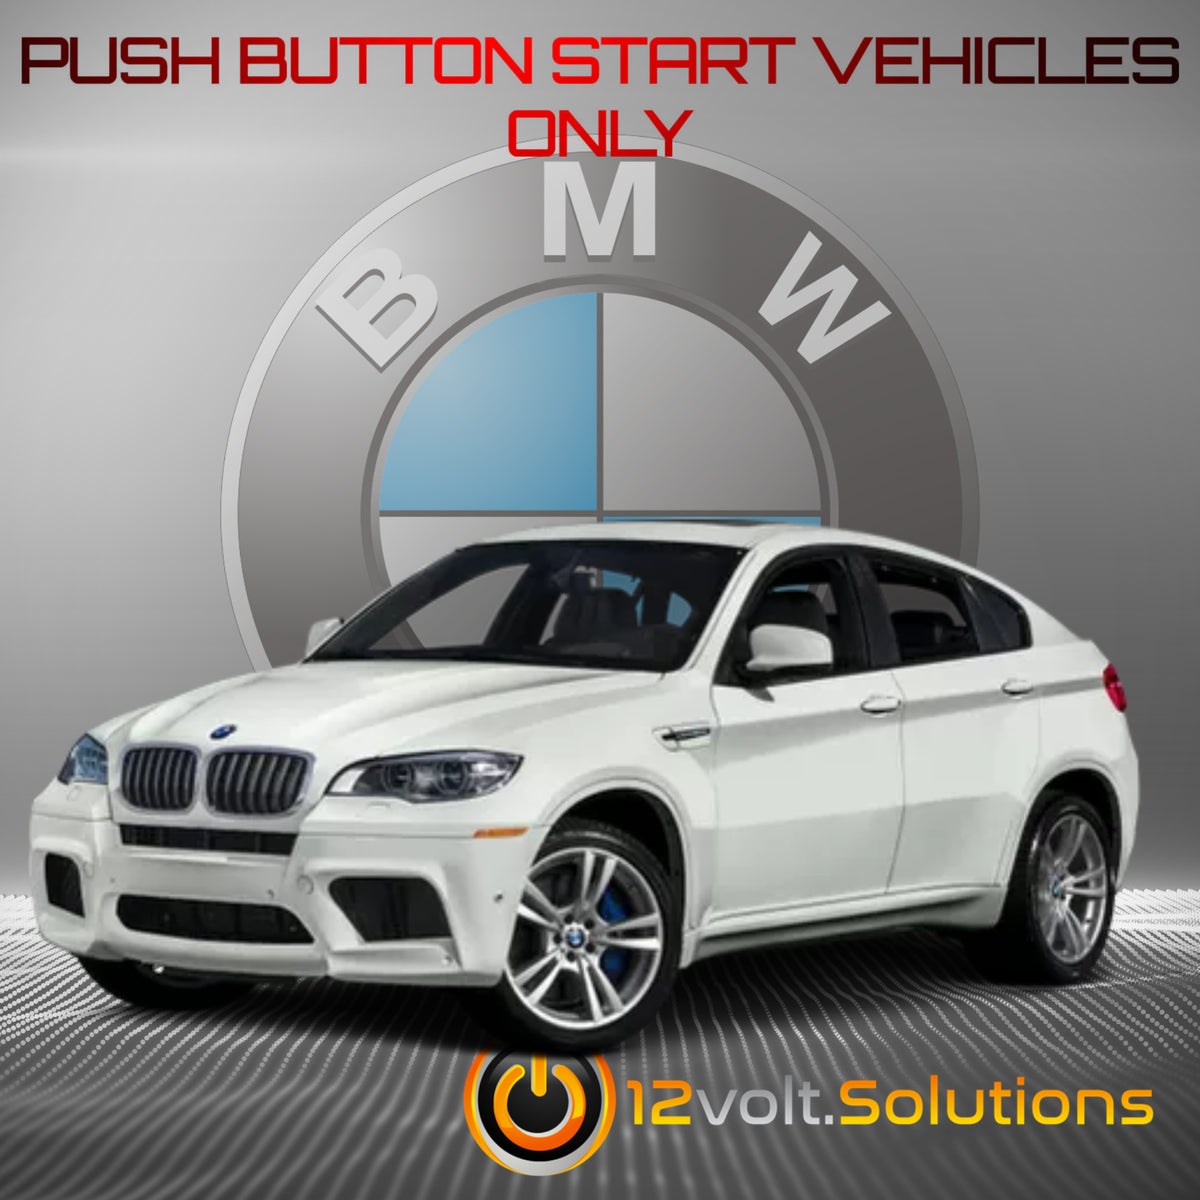 2010-2014 BMW X6 M-Series Plug and Play Remote Start Kit (Push Button Start)-12Volt.Solutions